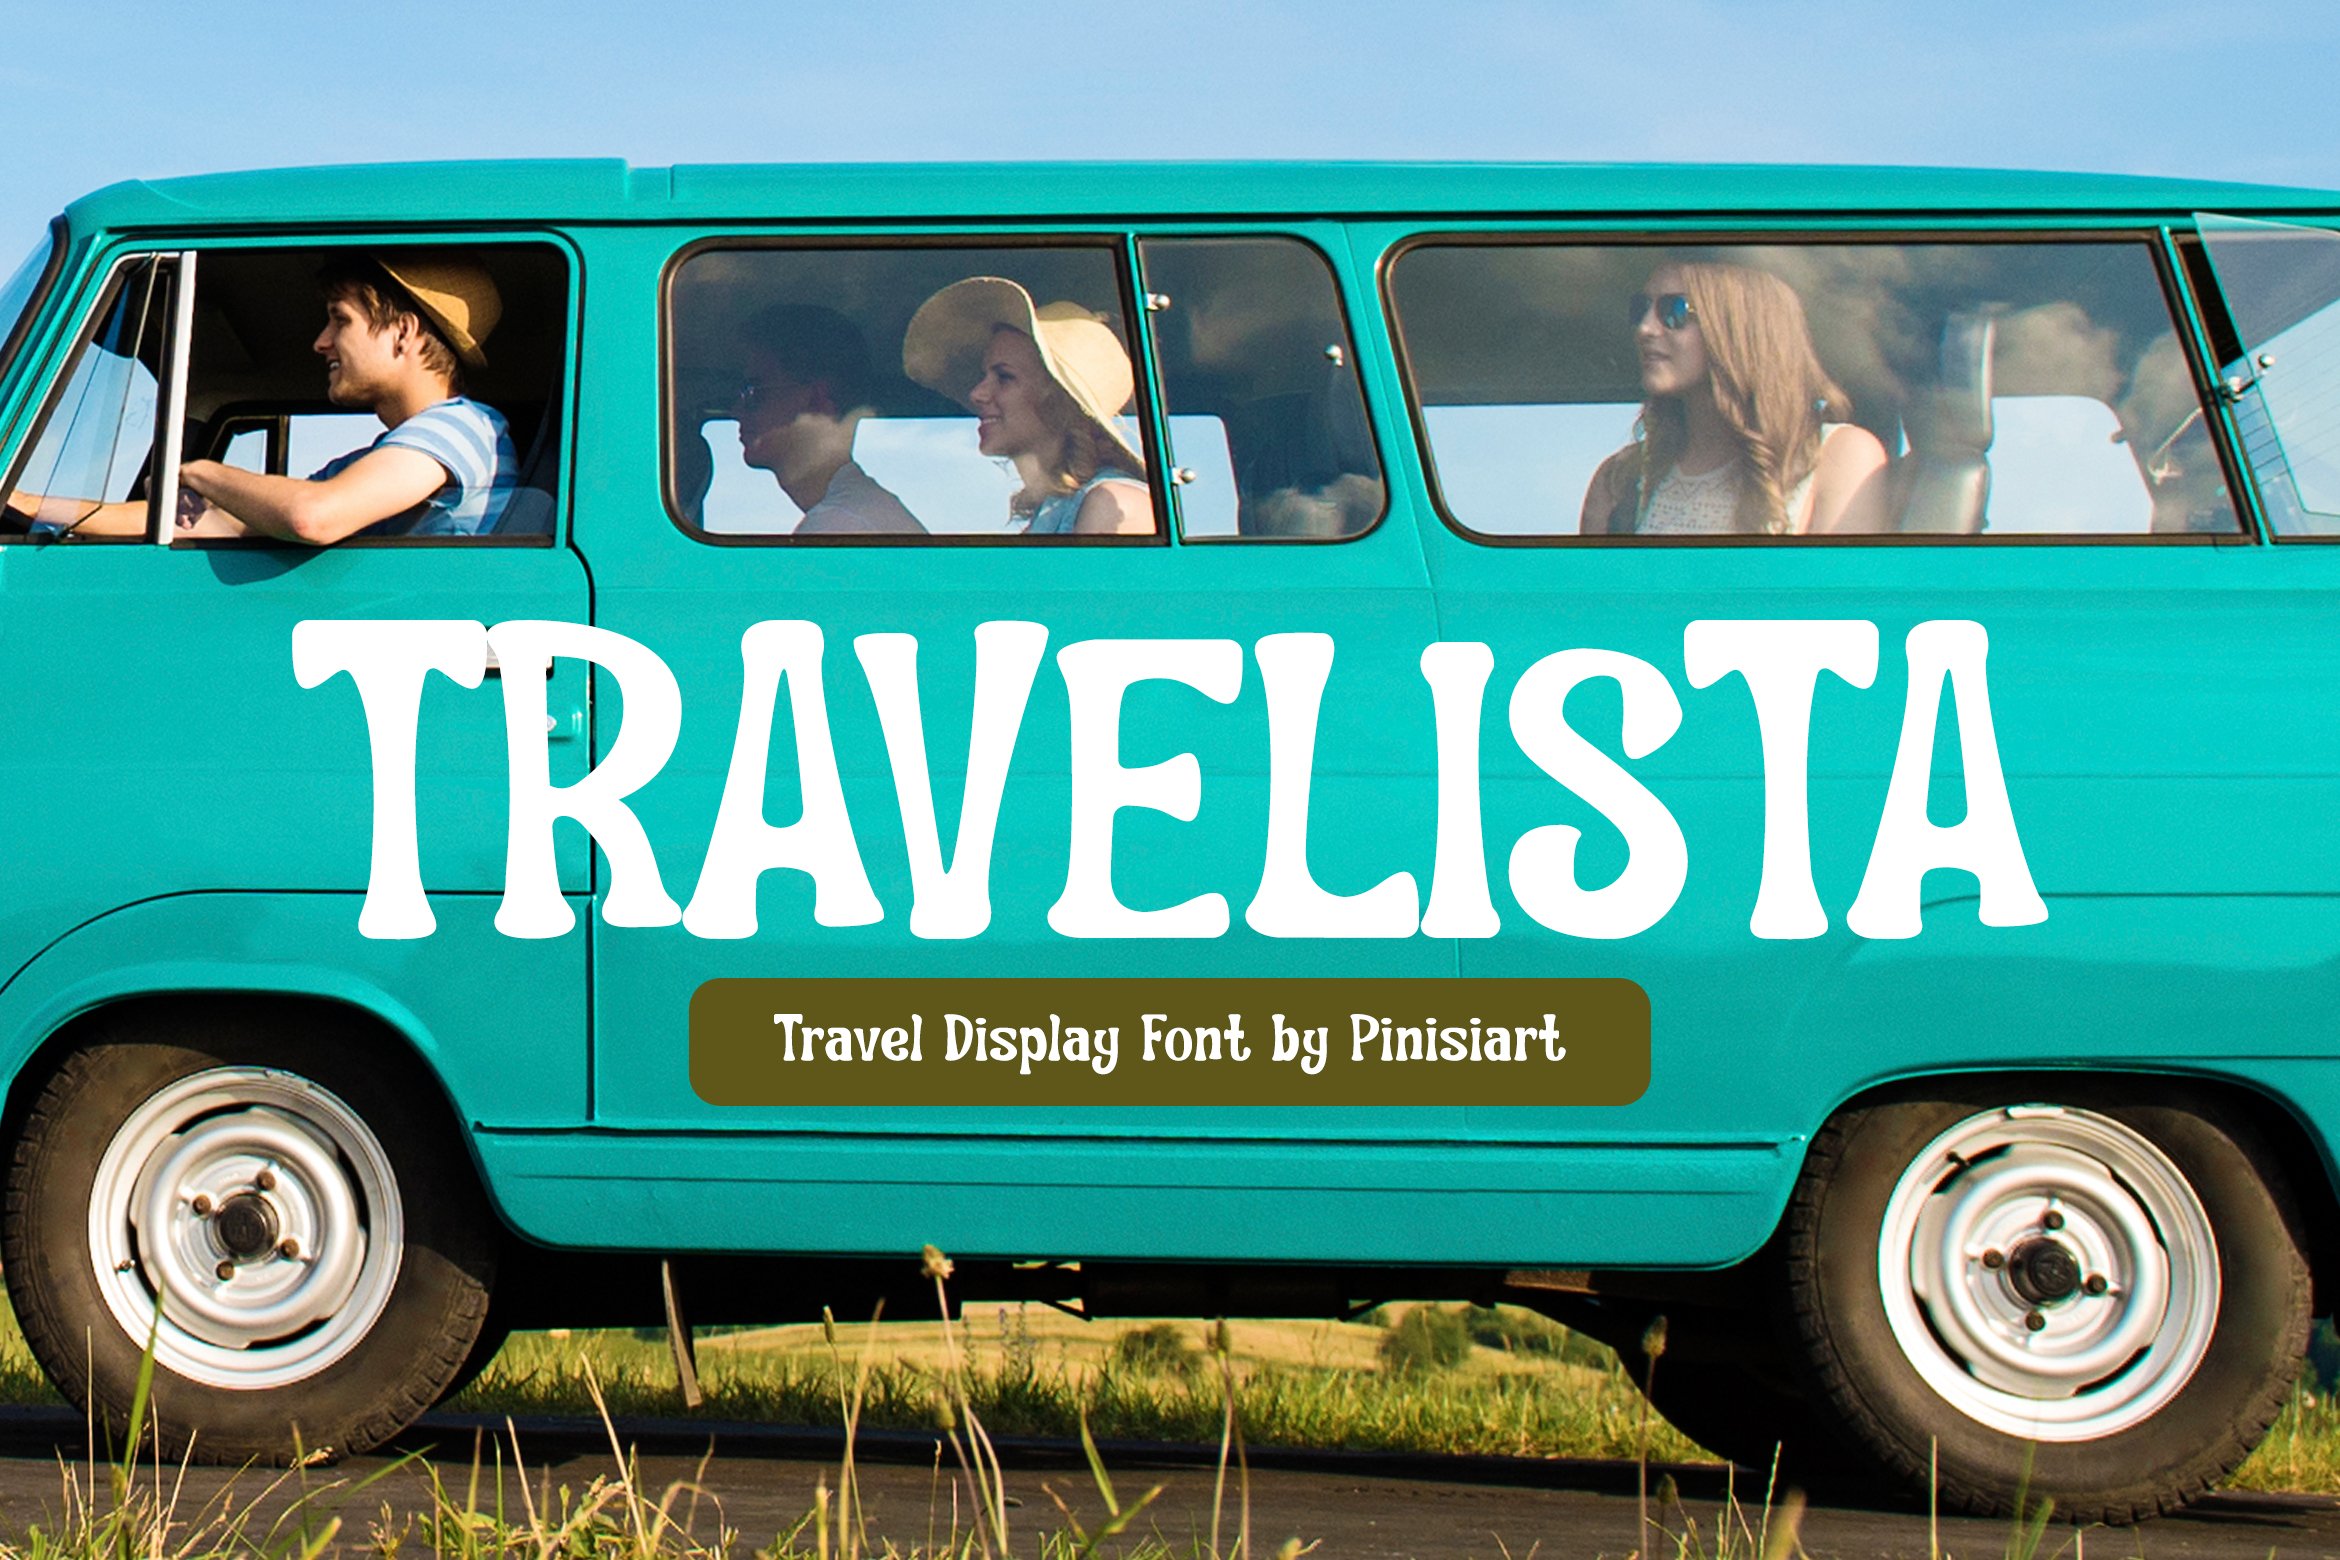 Travelista – Vacation Display Font cover image.